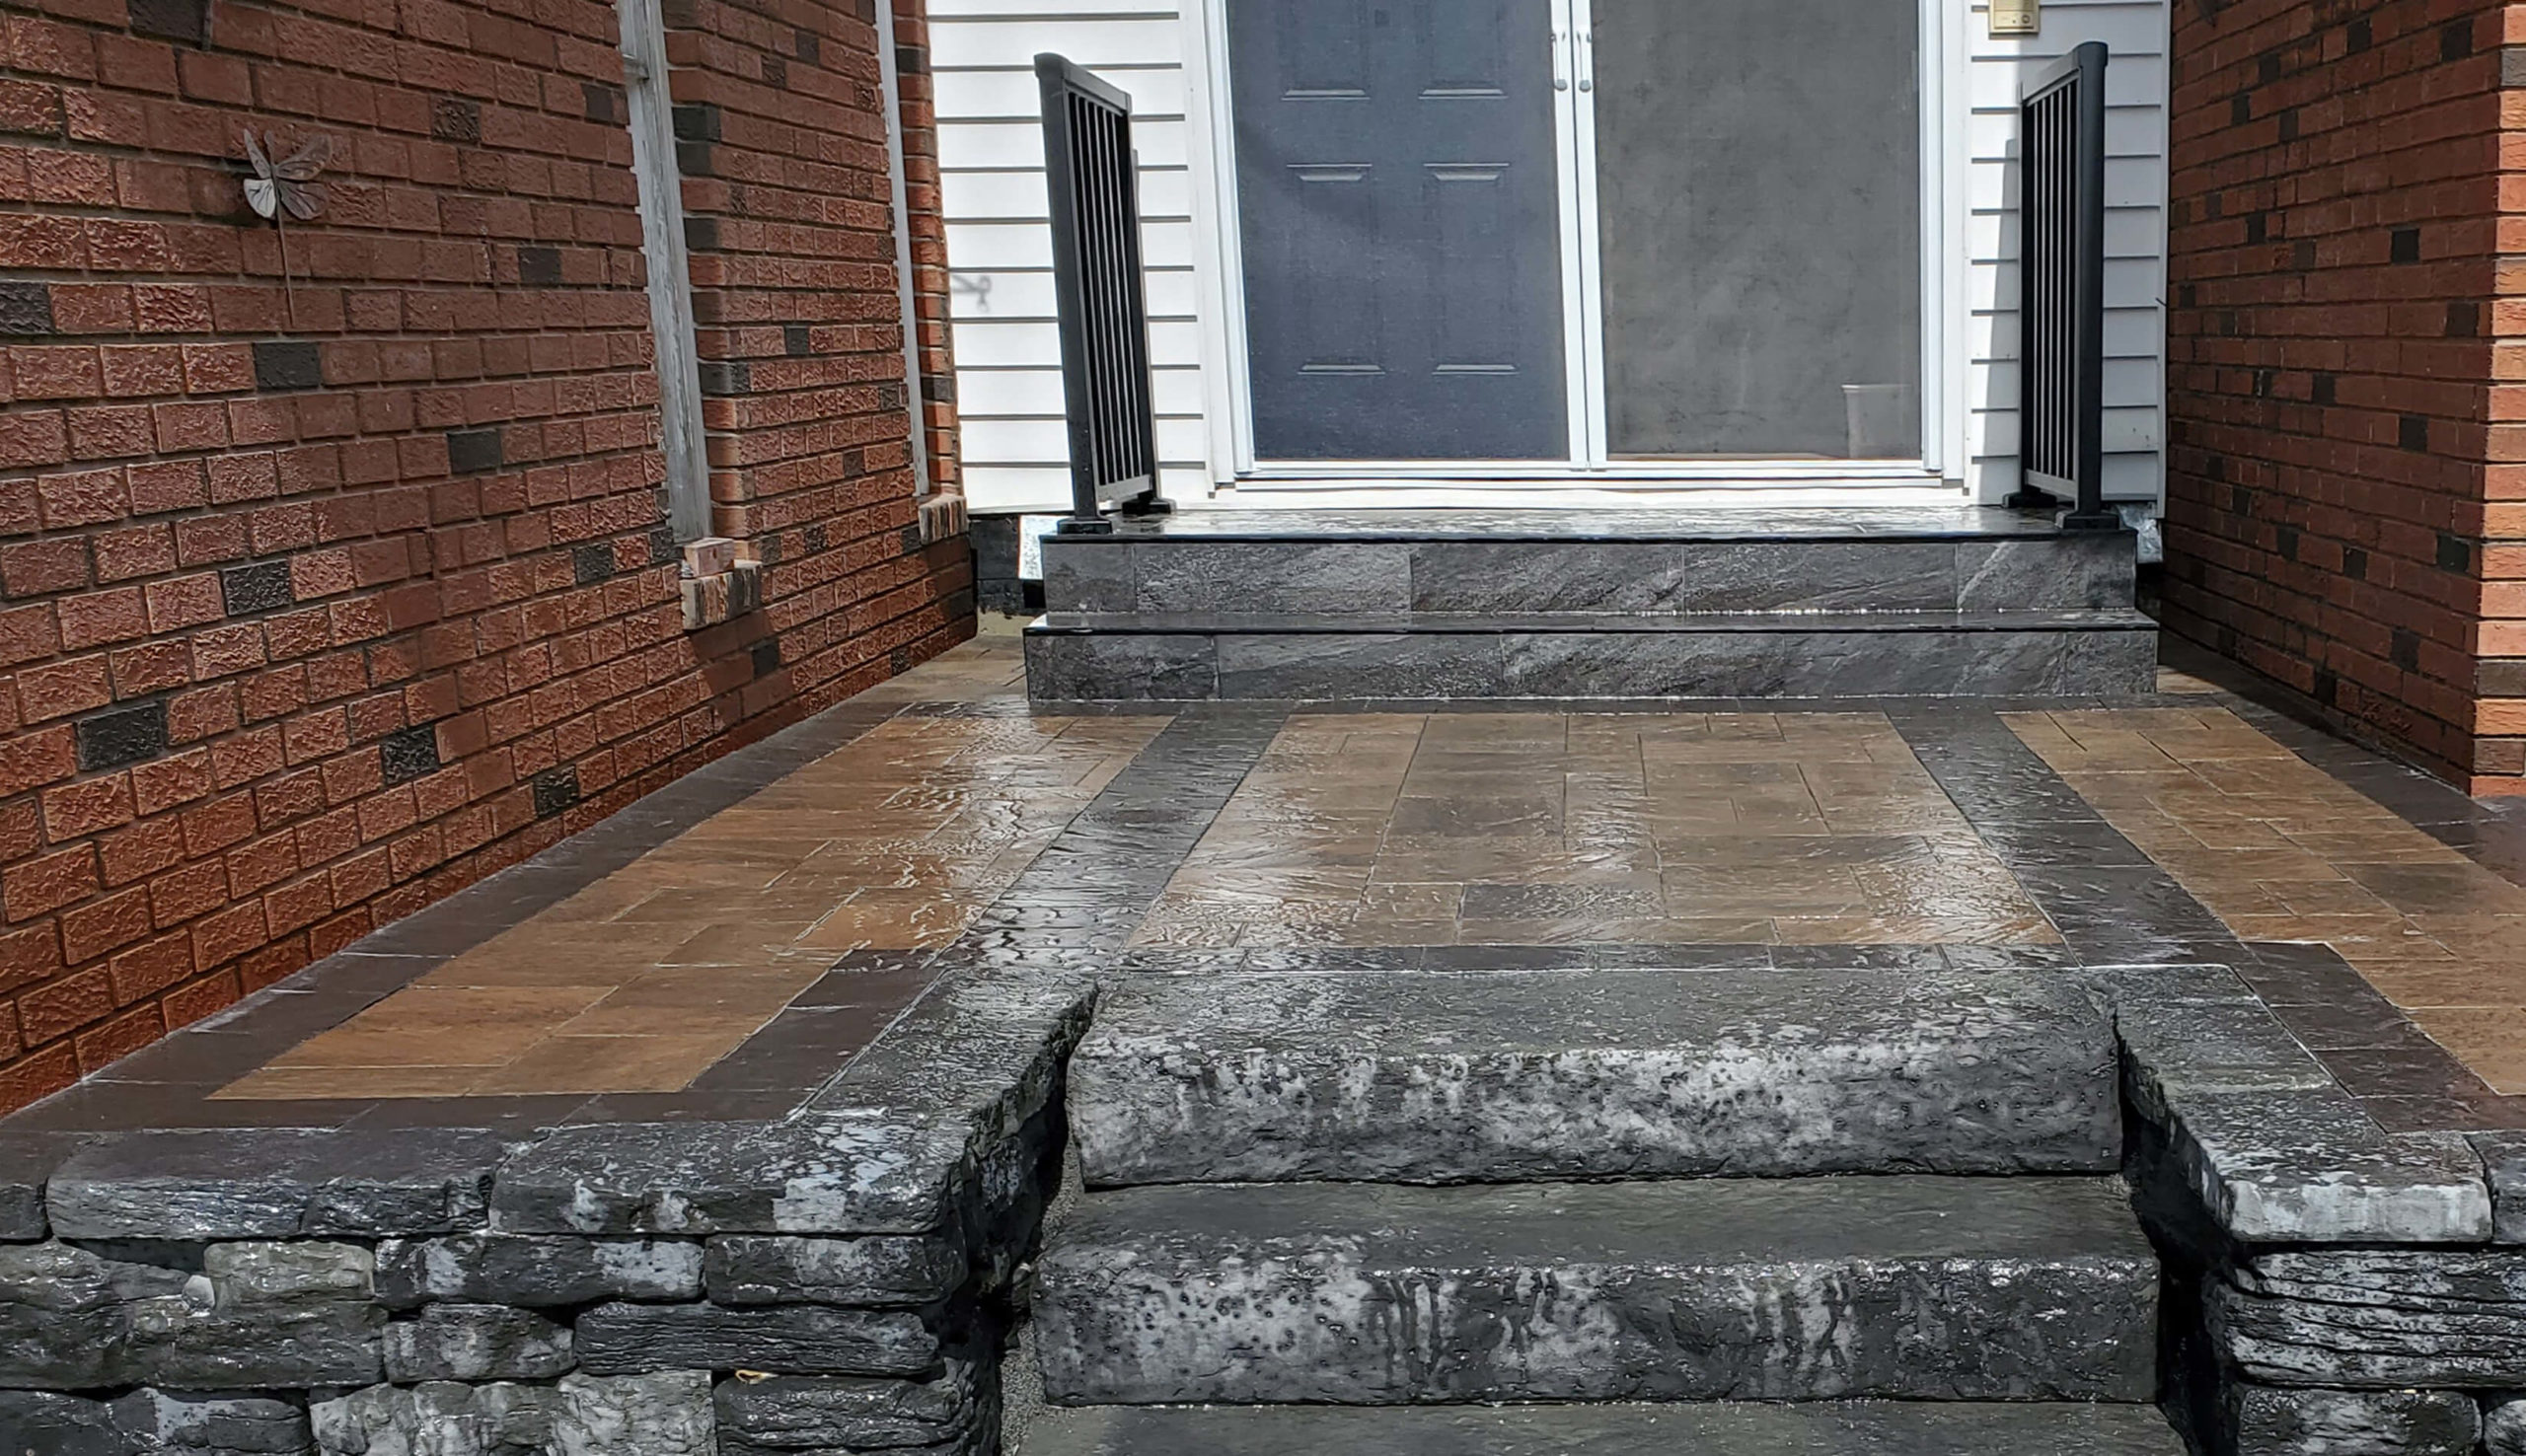 A new stone patio, installed by earth and turf landscaping.